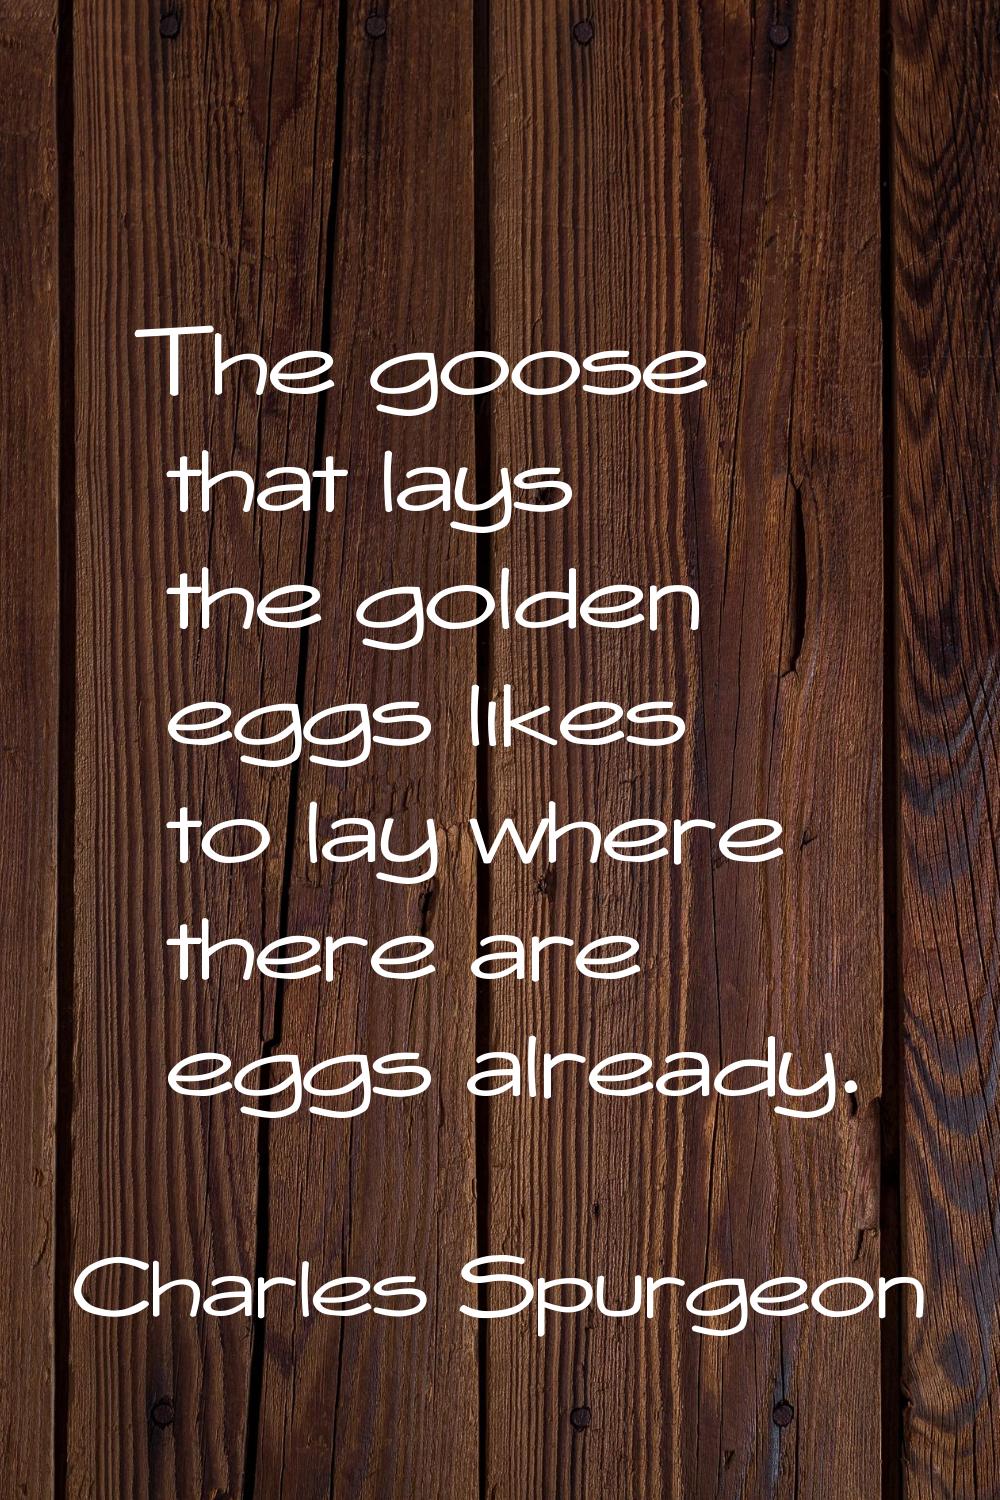 The goose that lays the golden eggs likes to lay where there are eggs already.